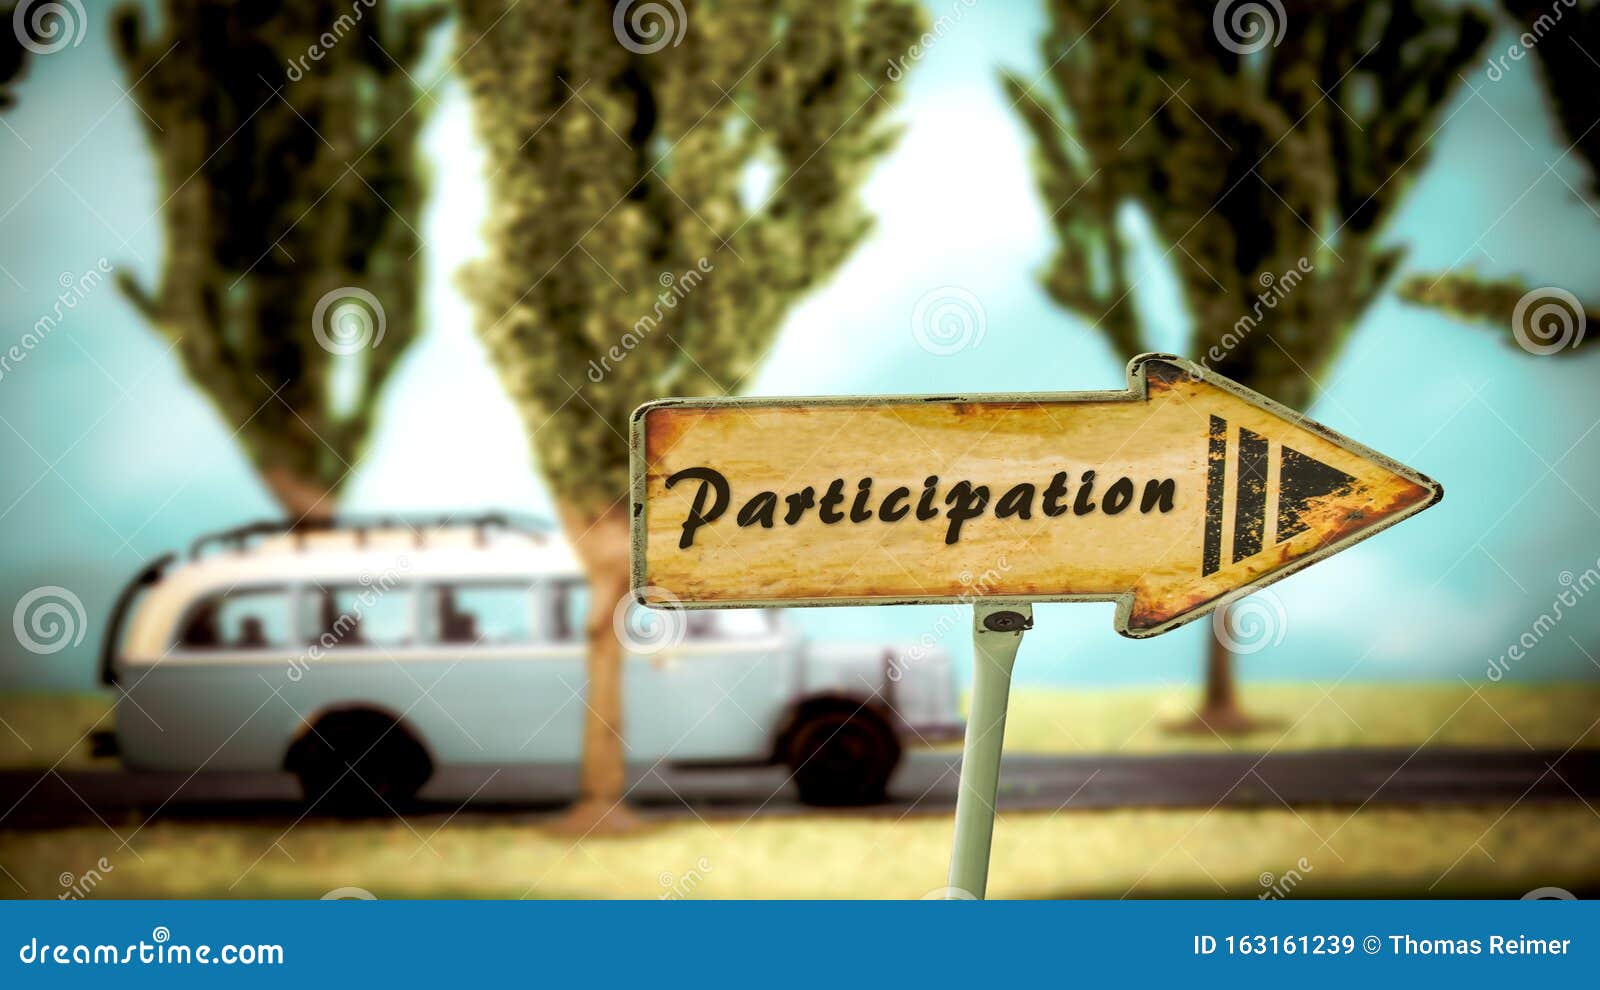 street sign to participation